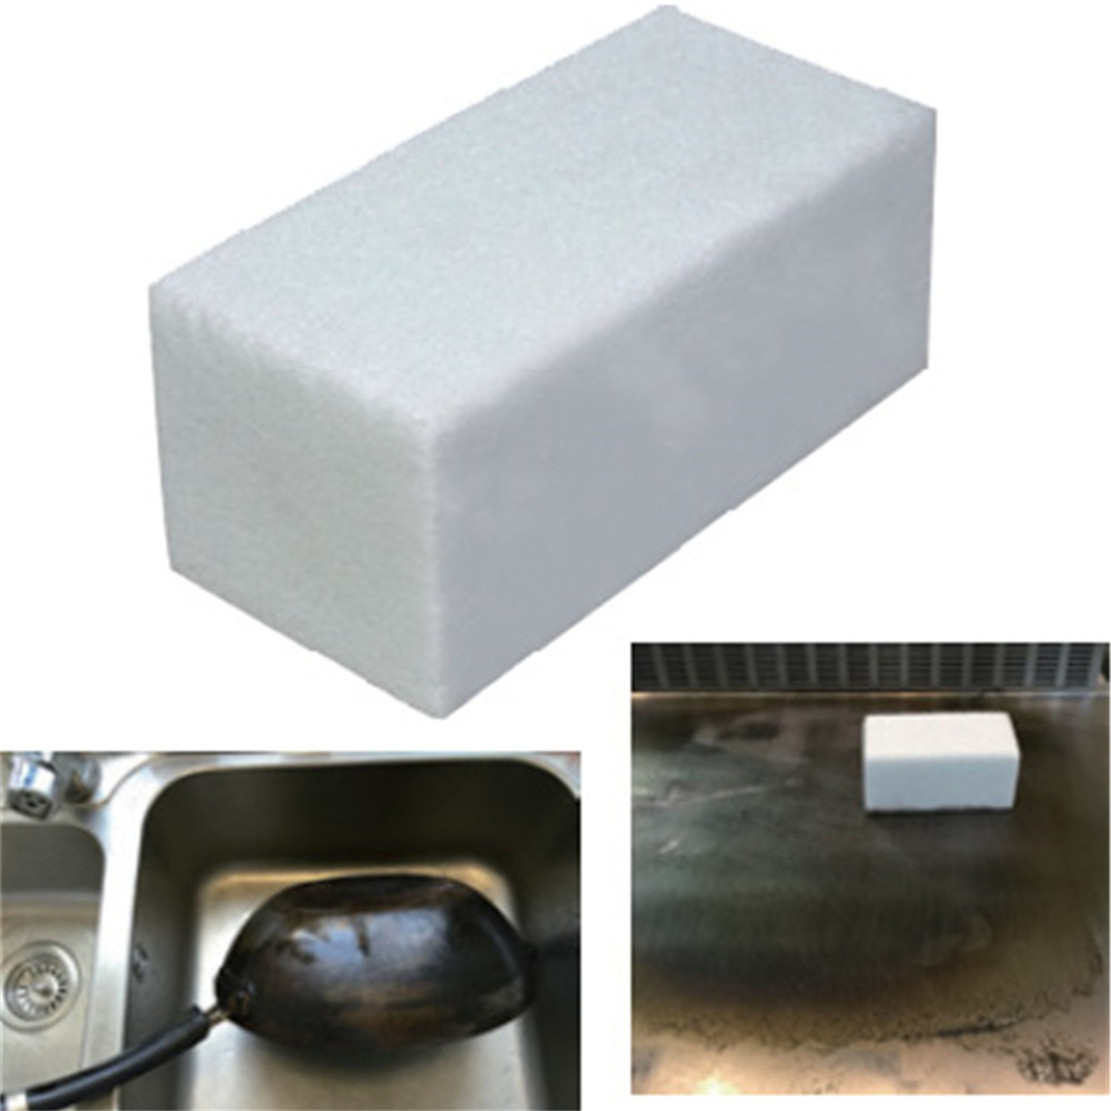 OEM package of grill cleaner pumice stone with handle 